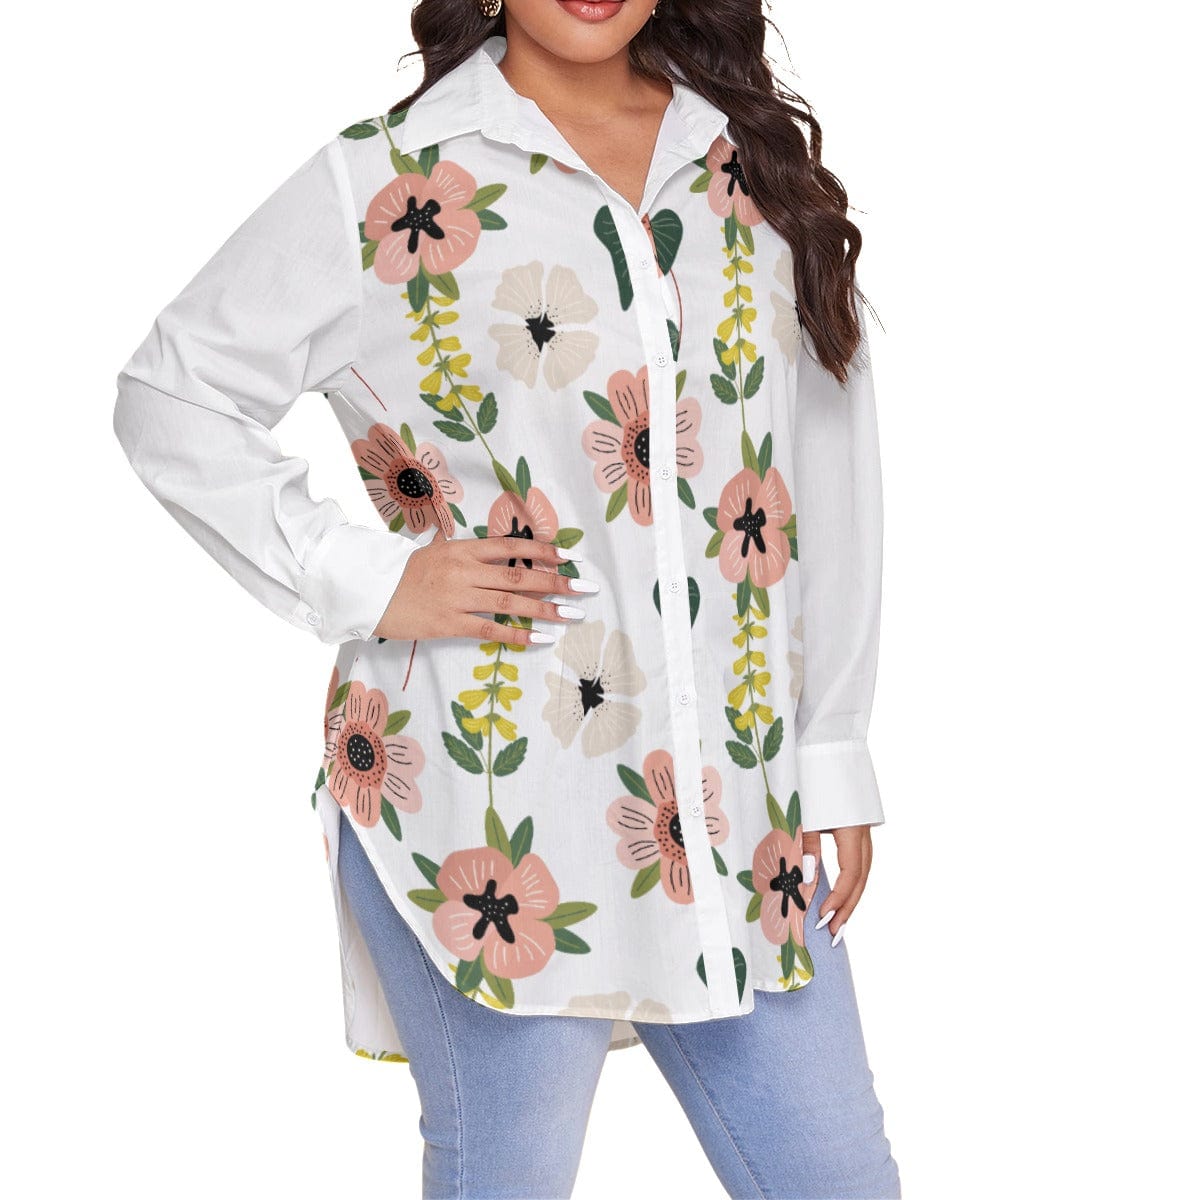 Yoycol Coral Floral - Women's Shirt With Long Sleeve(Plus Size)